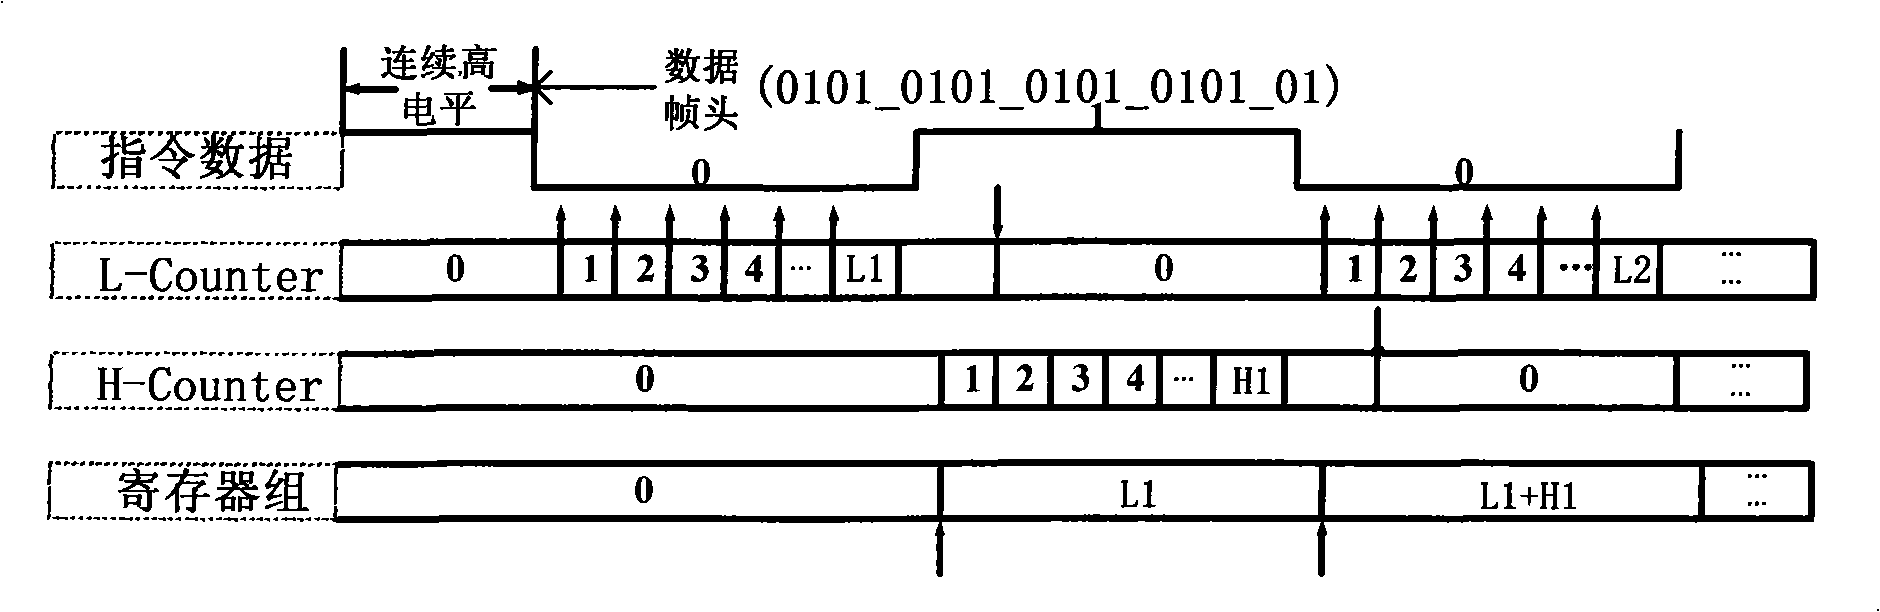 Radio frequency identification label chip data receiving synchronous method